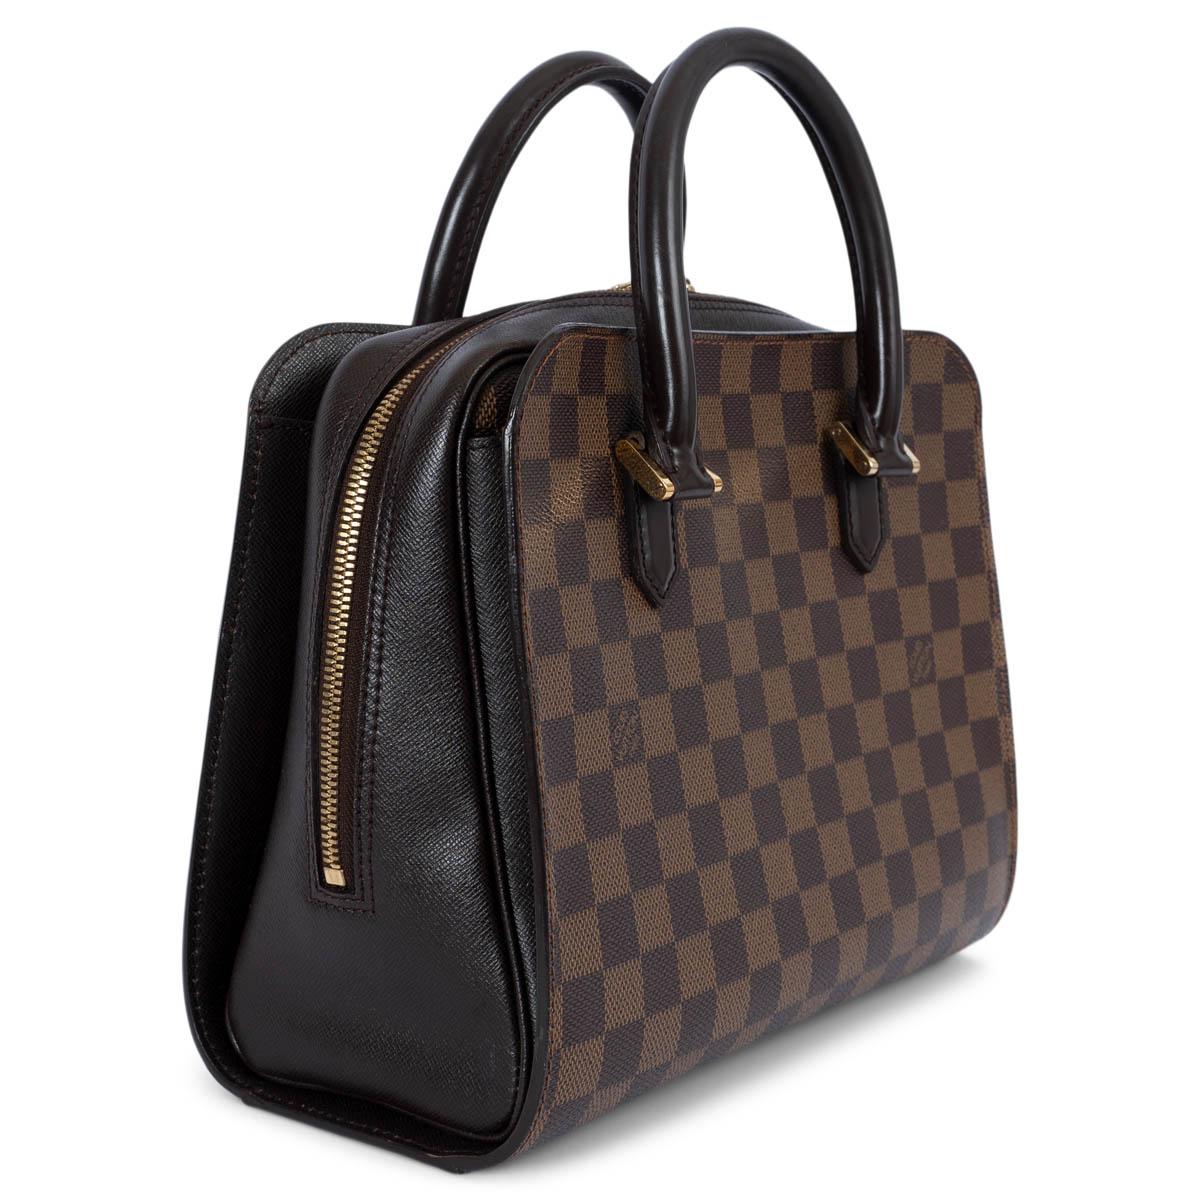 100% authentic Louis Vuitton Triana bag in Ebene brown classic Damier canvas. The design features two rolled top handles, a two-way zip fastening, gold-tone hardware and two big outside pockets. Lined in orange alcantara with one zip pocket against